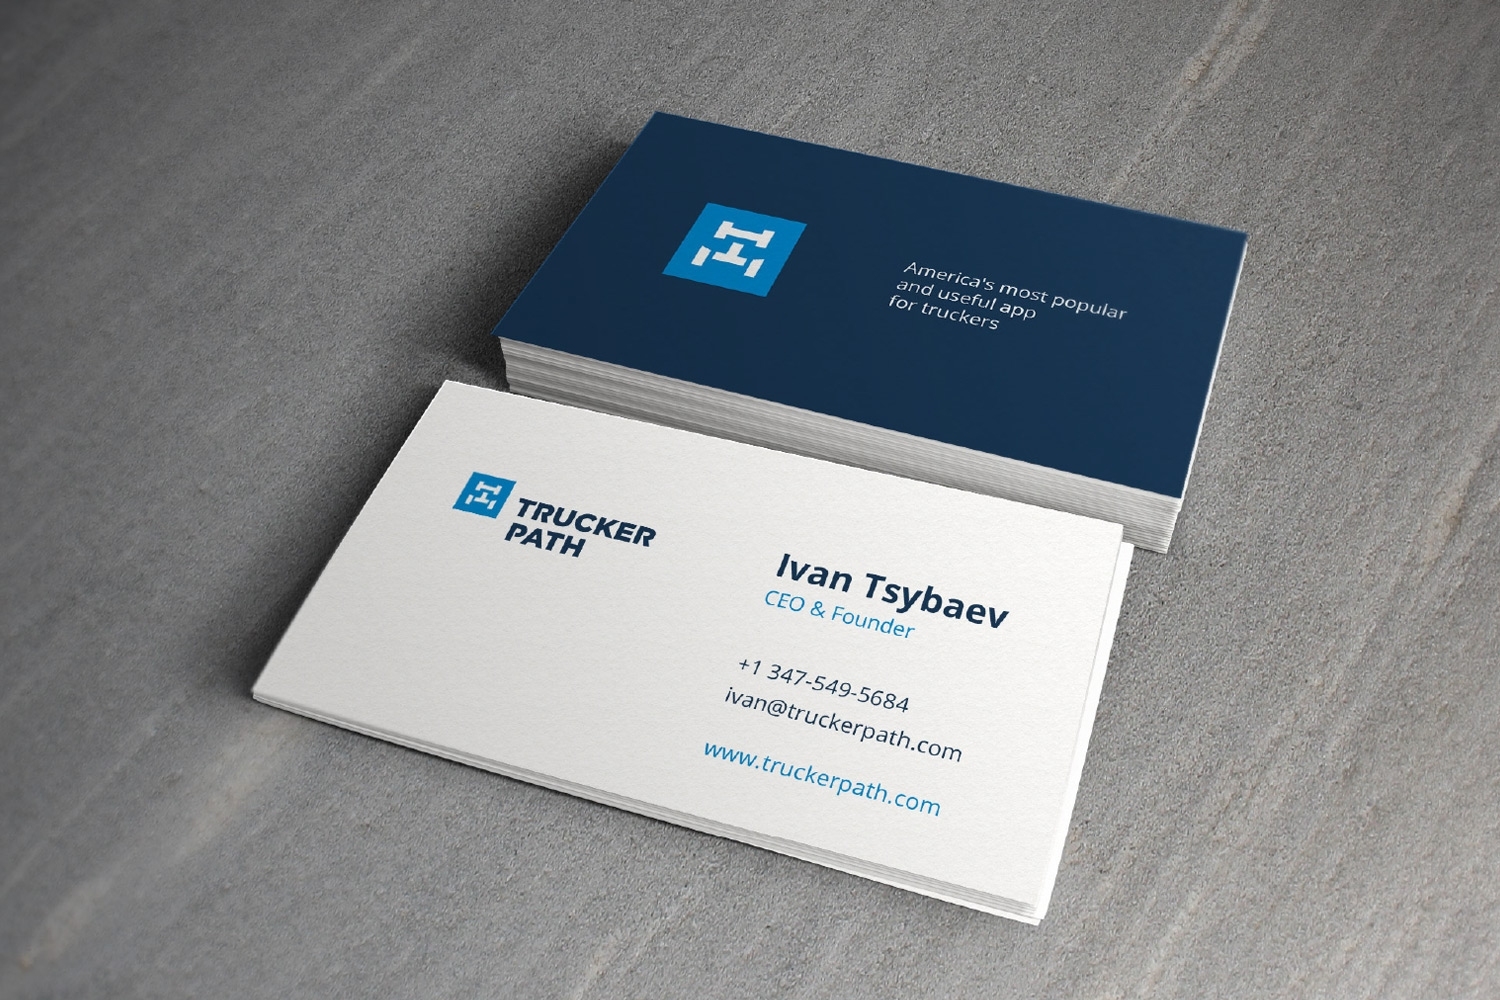 Business Cards For Truckers - Business Card Tips Intended For Transport Business Cards Templates Free